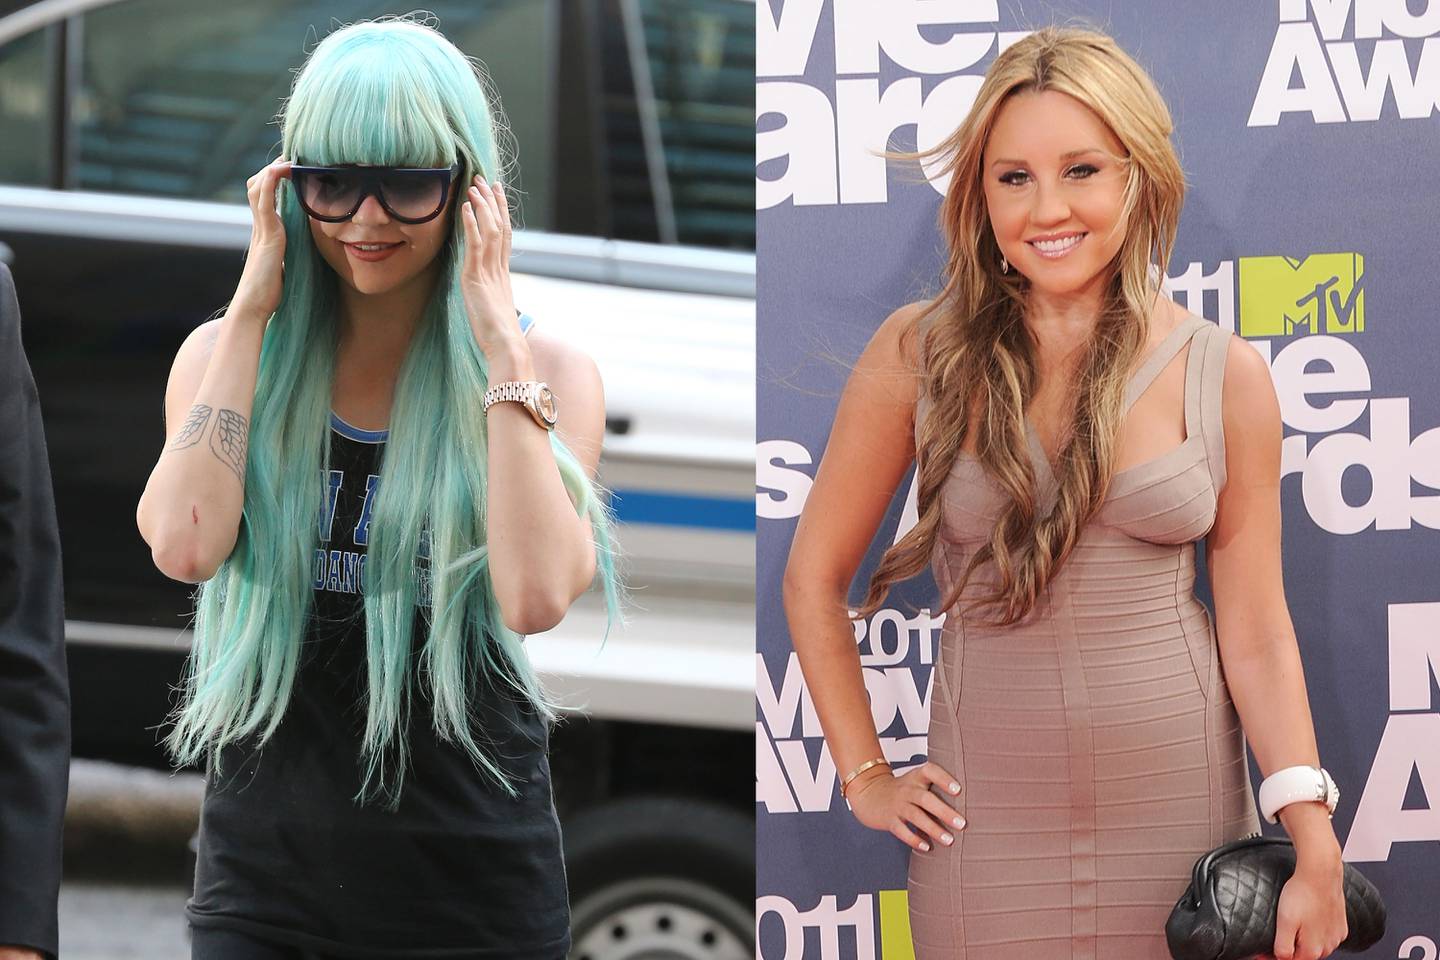 (Left) Amanda Bynes attends an appearance at Manhattan Criminal Court on July 9, 2013 in New York City. (Right) Actress Amanda Bynes arrives at the 2011 MTV Movie Awards at Universal Studios' Gibson Amphitheater on June 5, 2011 in Universal City, California.